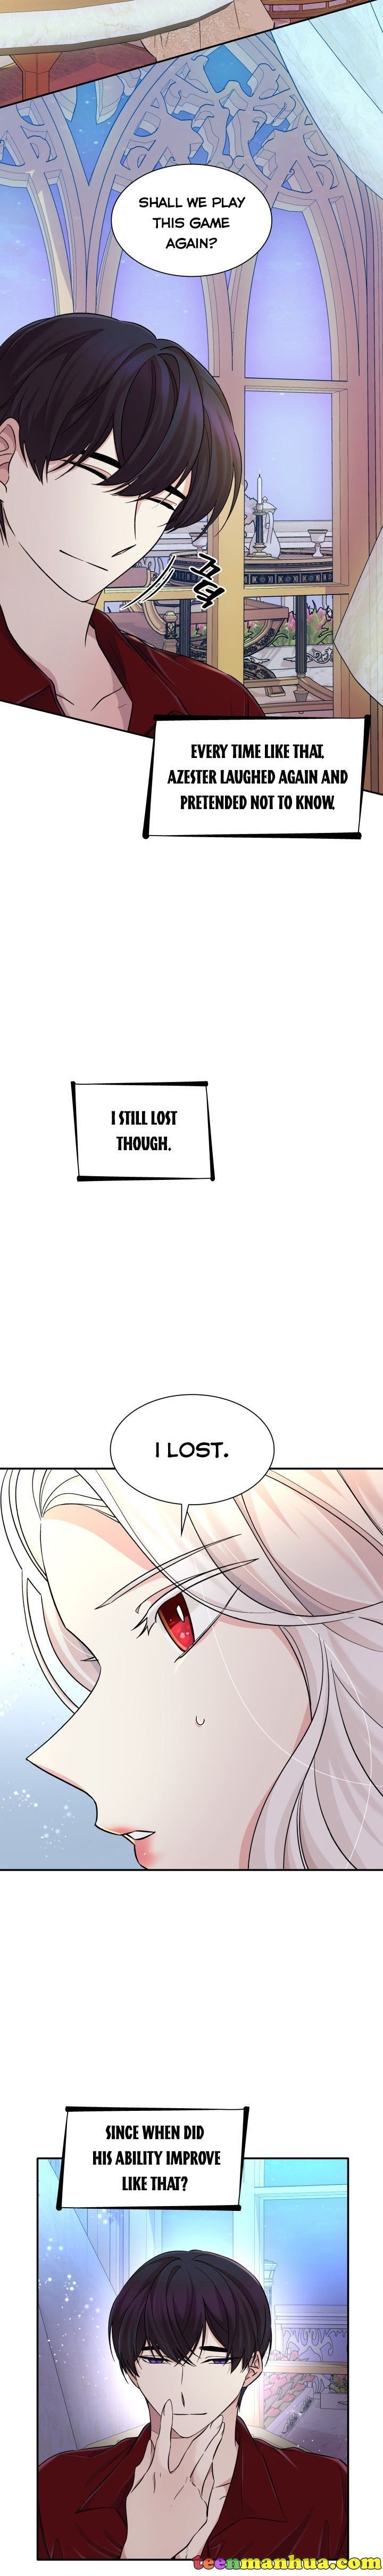 I Lost the Leash of the Yandere Male Lead Chapter 19 - Page 2